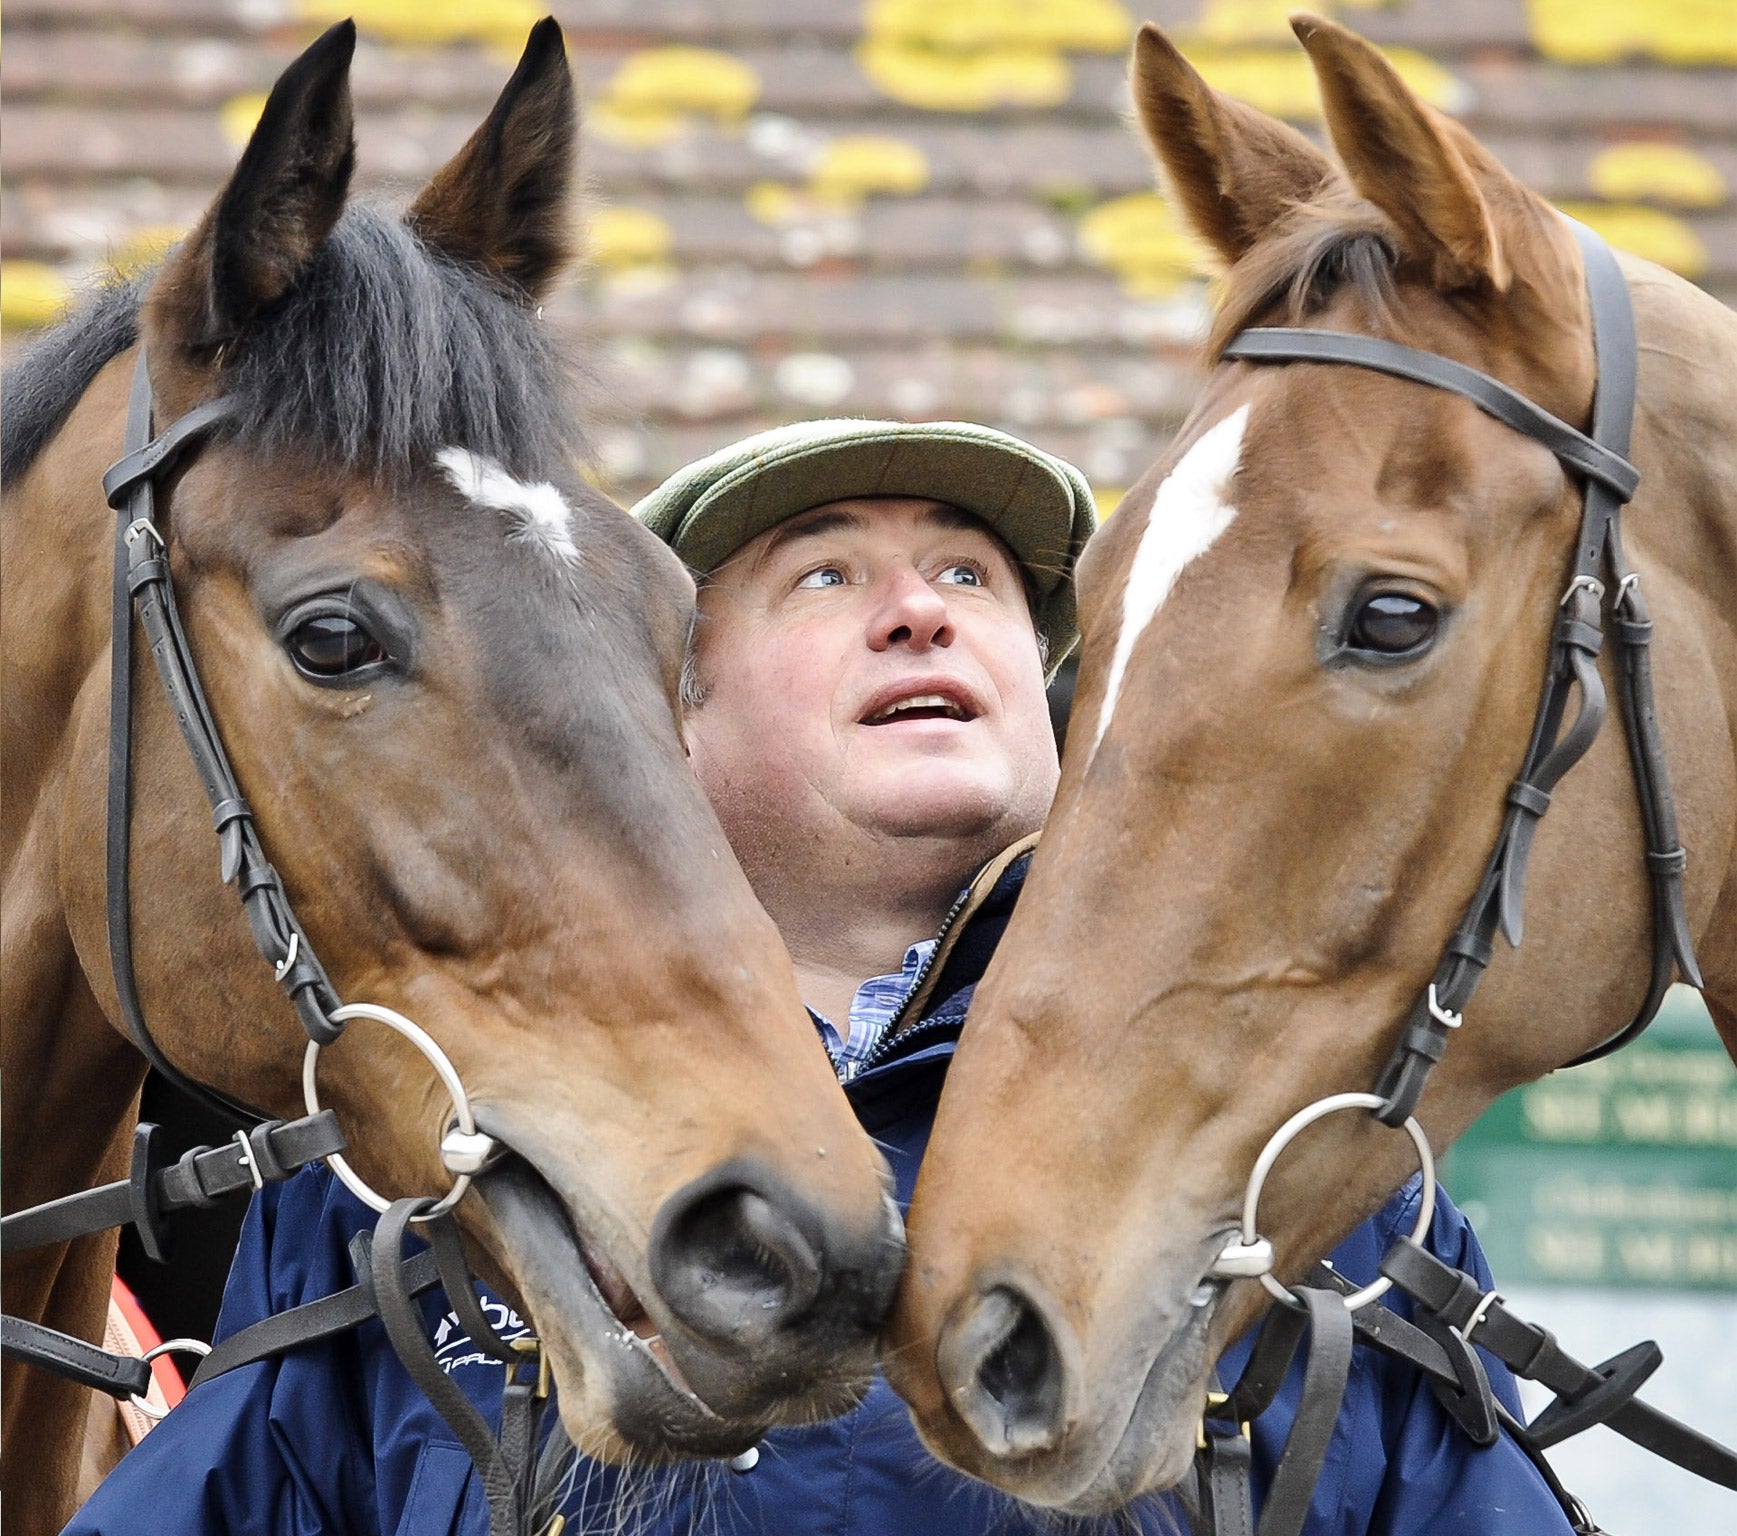 Champion trainer Paul Nicholls expects Zarkandar (left) and Silviniaco Conti to continue his winning legacy at Cheltenham